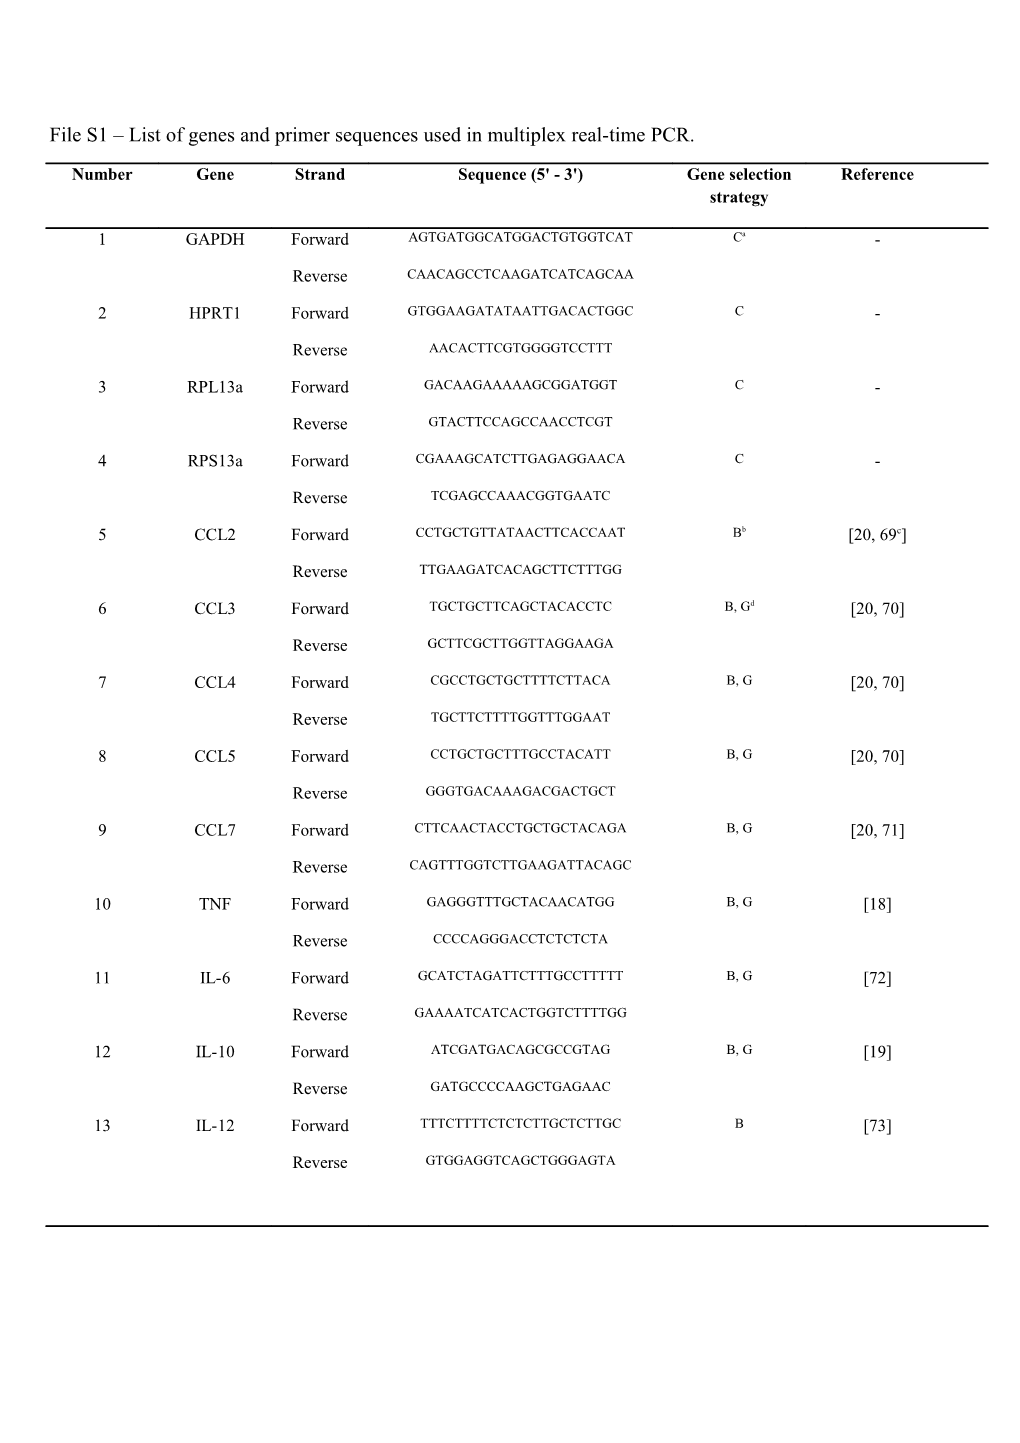 File S1 List of Genes and Primer Sequences Used in Multiplex Real-Time PCR